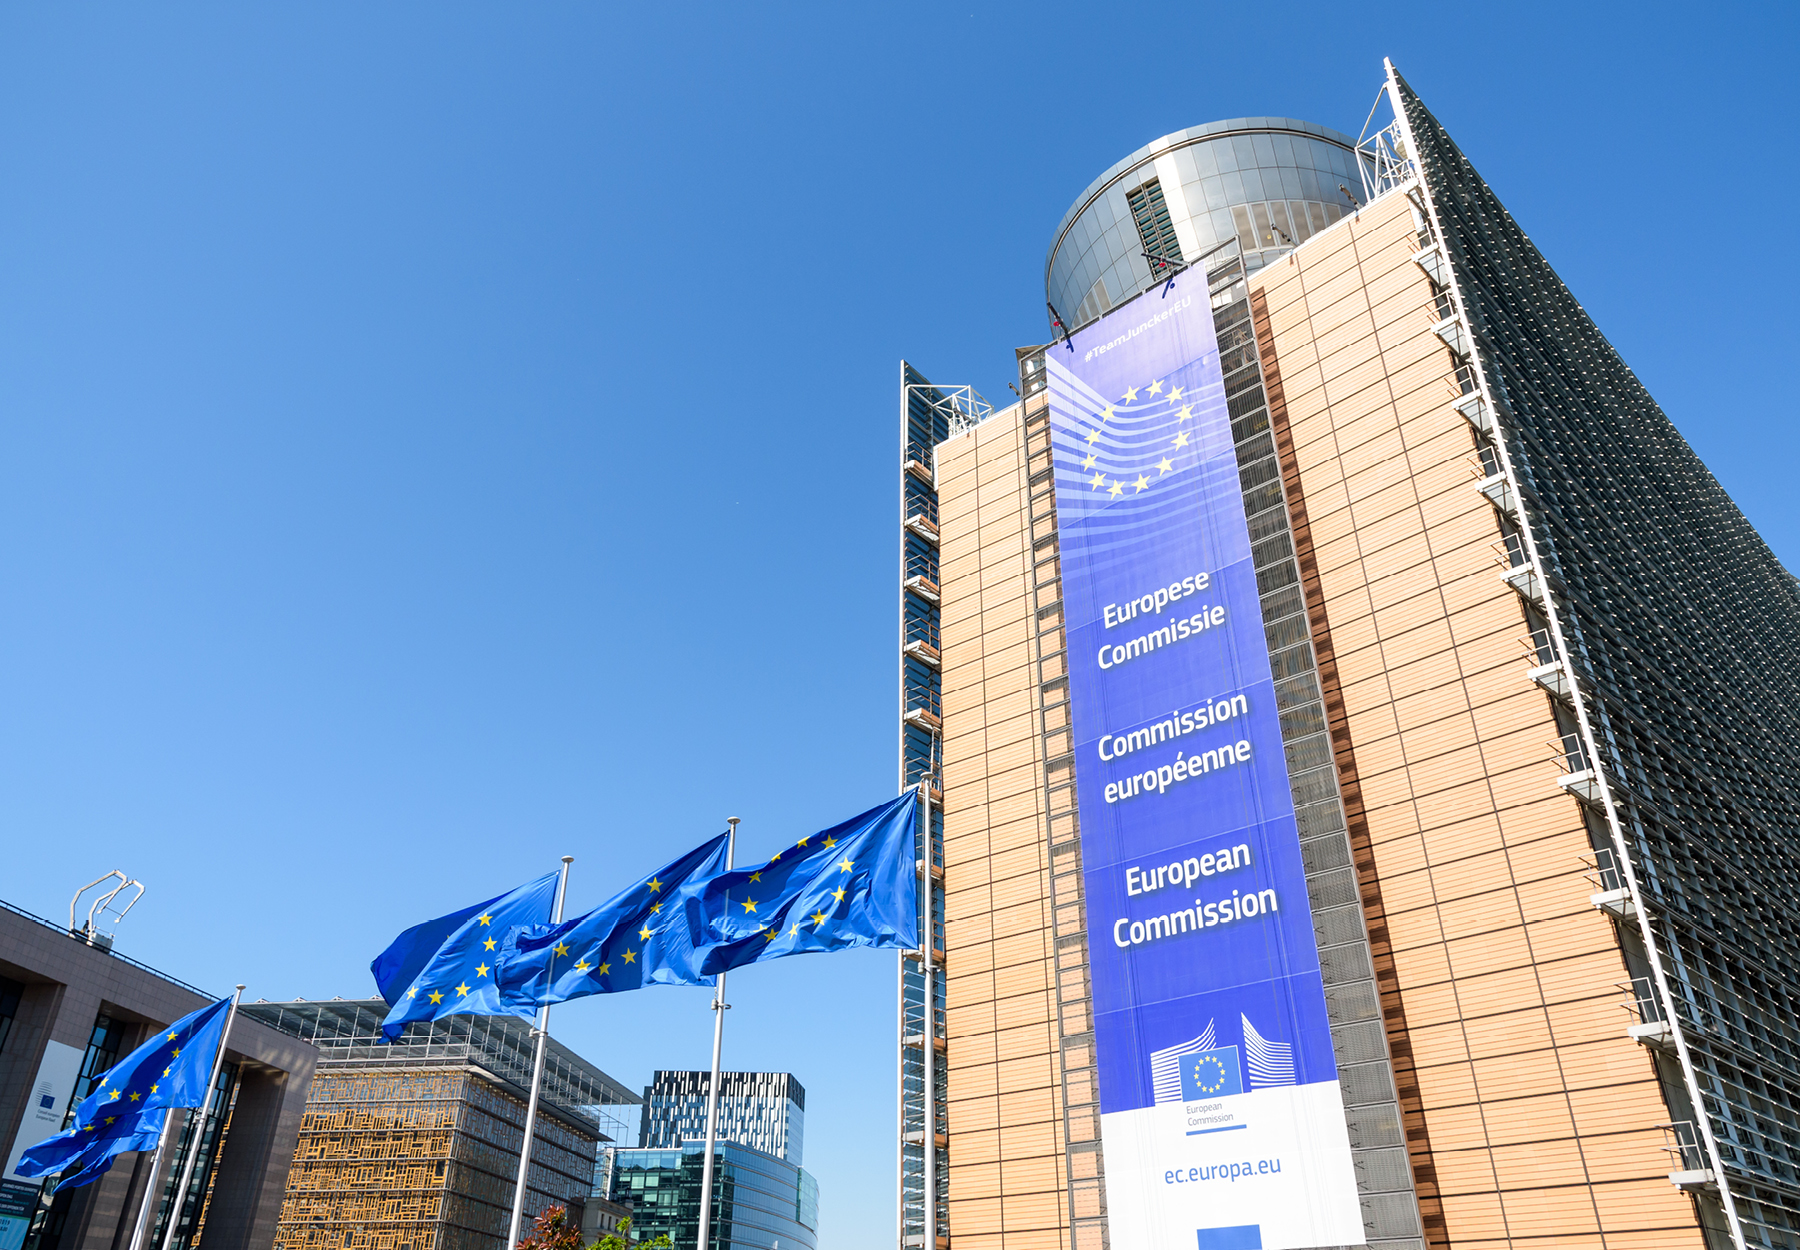 An image of the European Commission (EC) building with three EC flags in front.